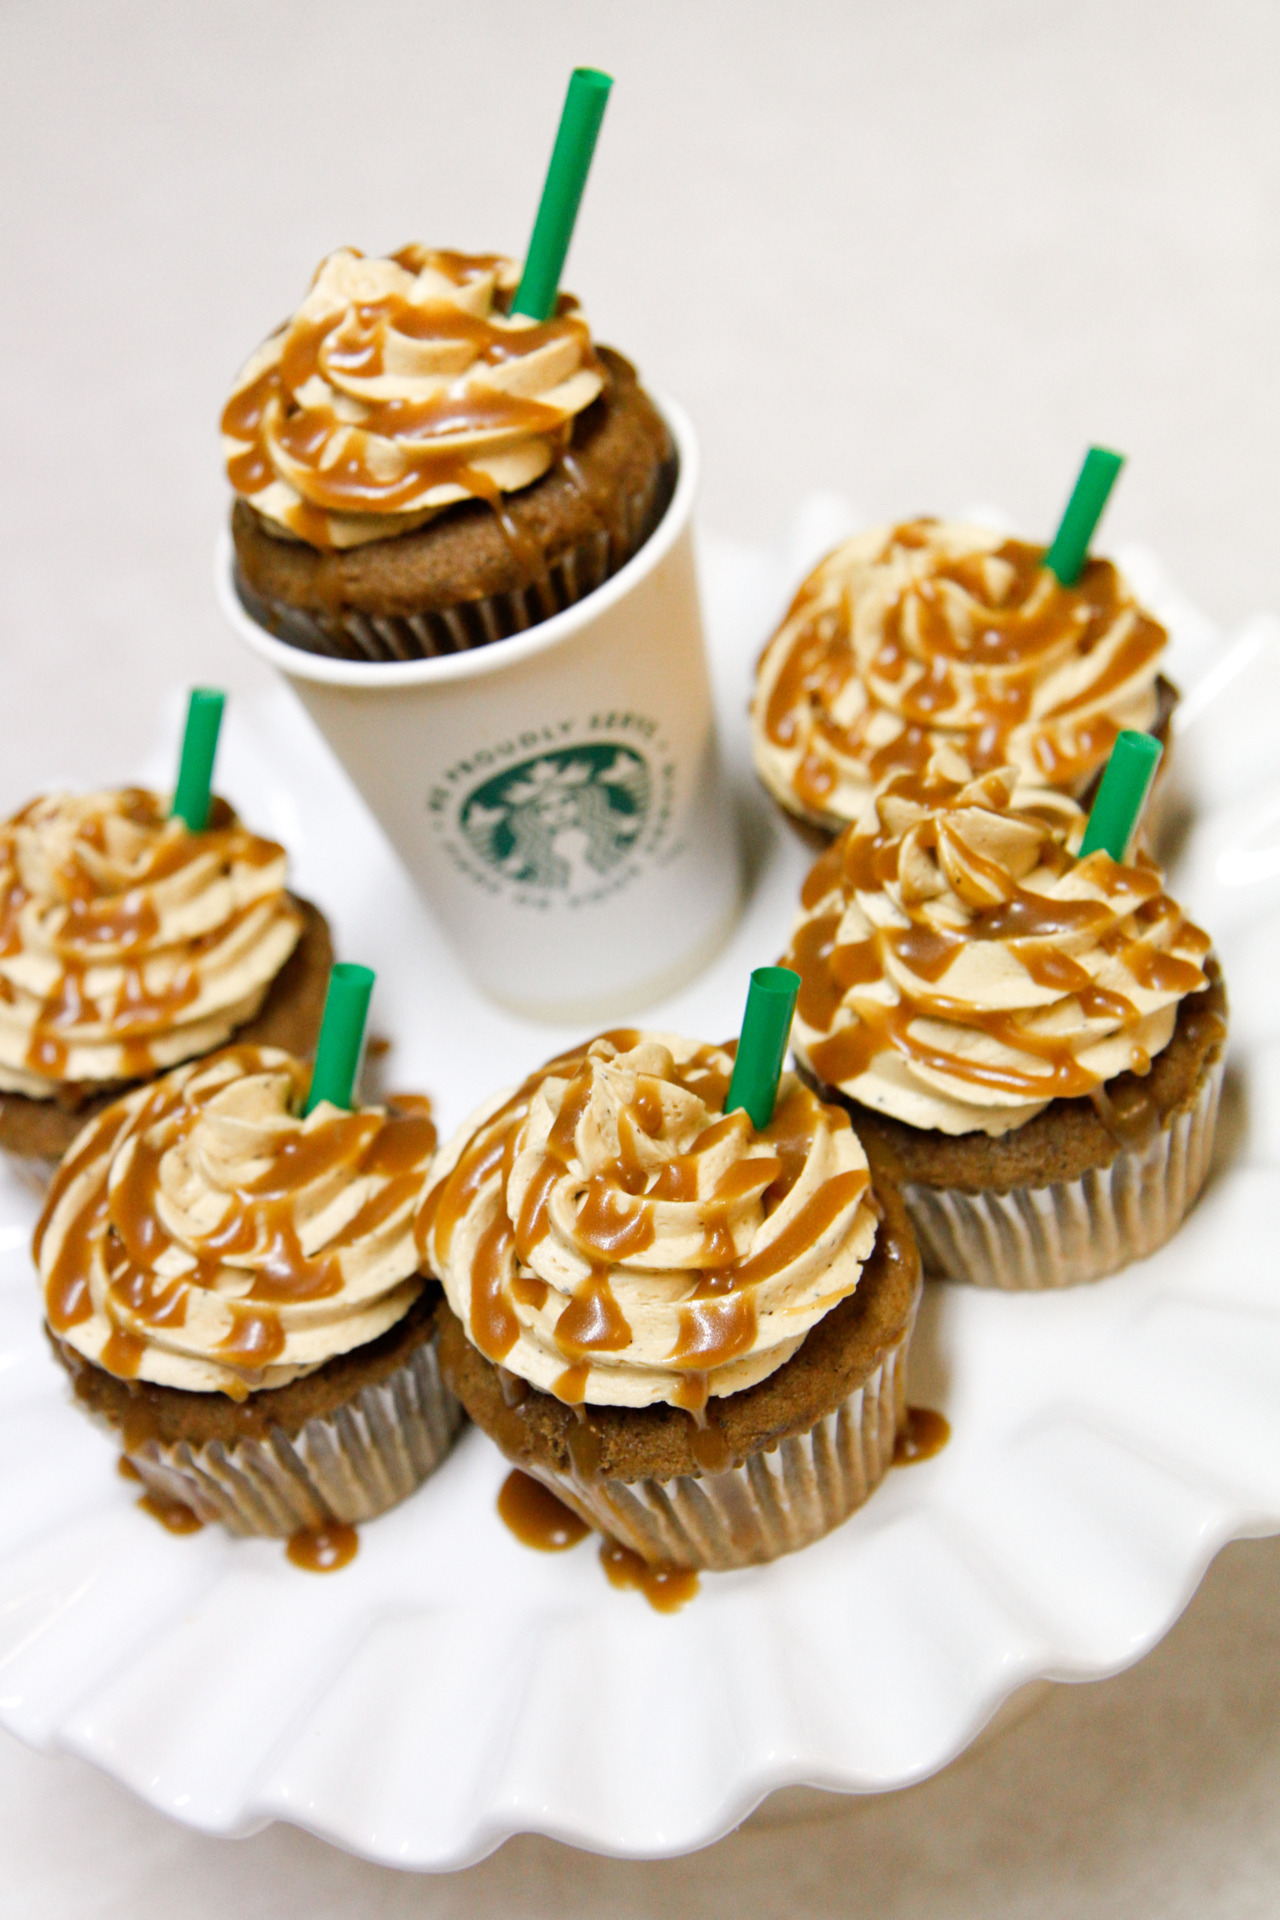 STARBUCKS CUPCAKES I can’t get over how cute...